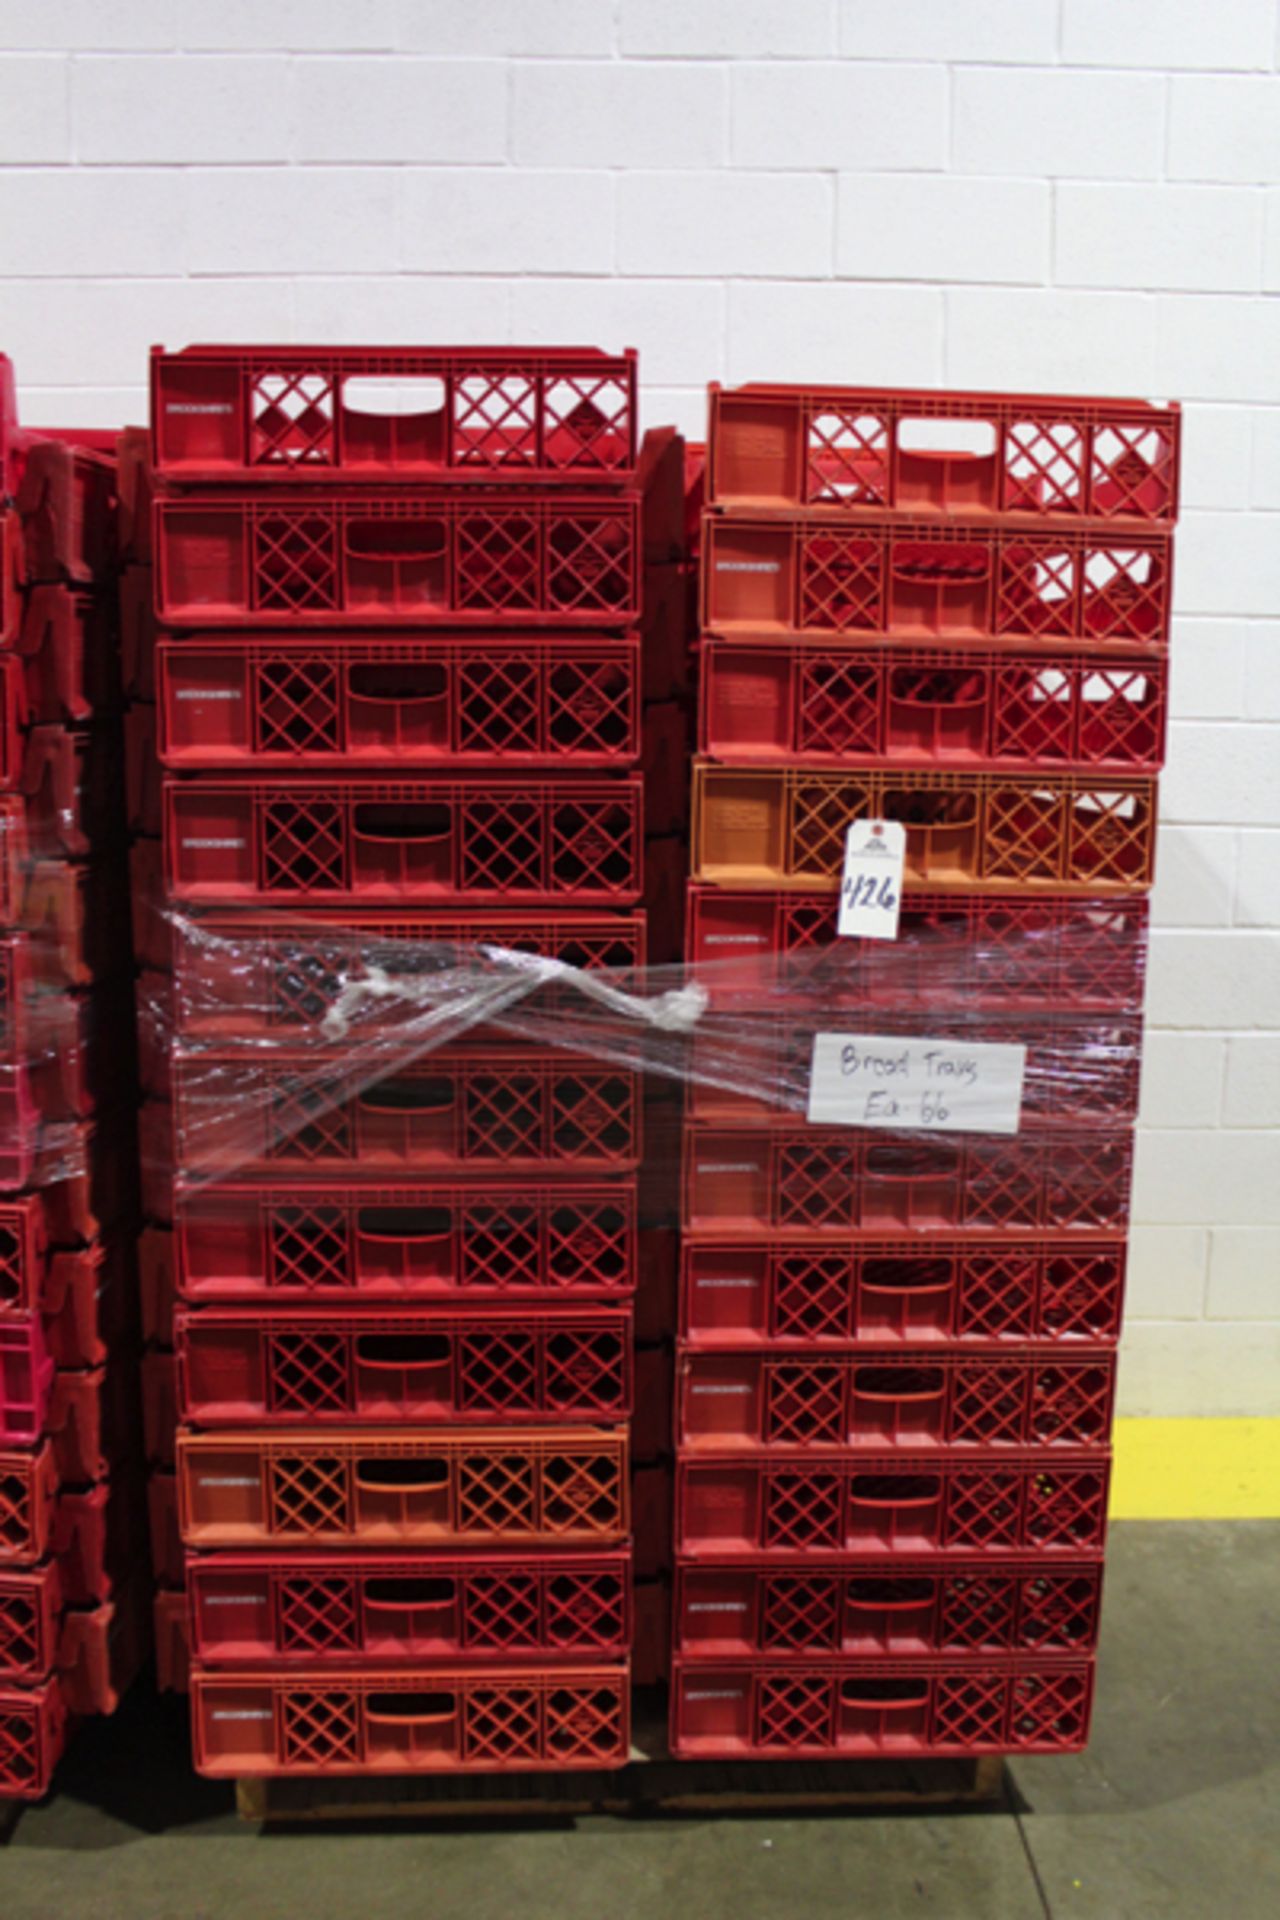 Lot of (66) Bread Trays, 20 1/2" x 24 3/4" x 5 1/4" | Loading Price: $25 Or Buyer May Hand Carry